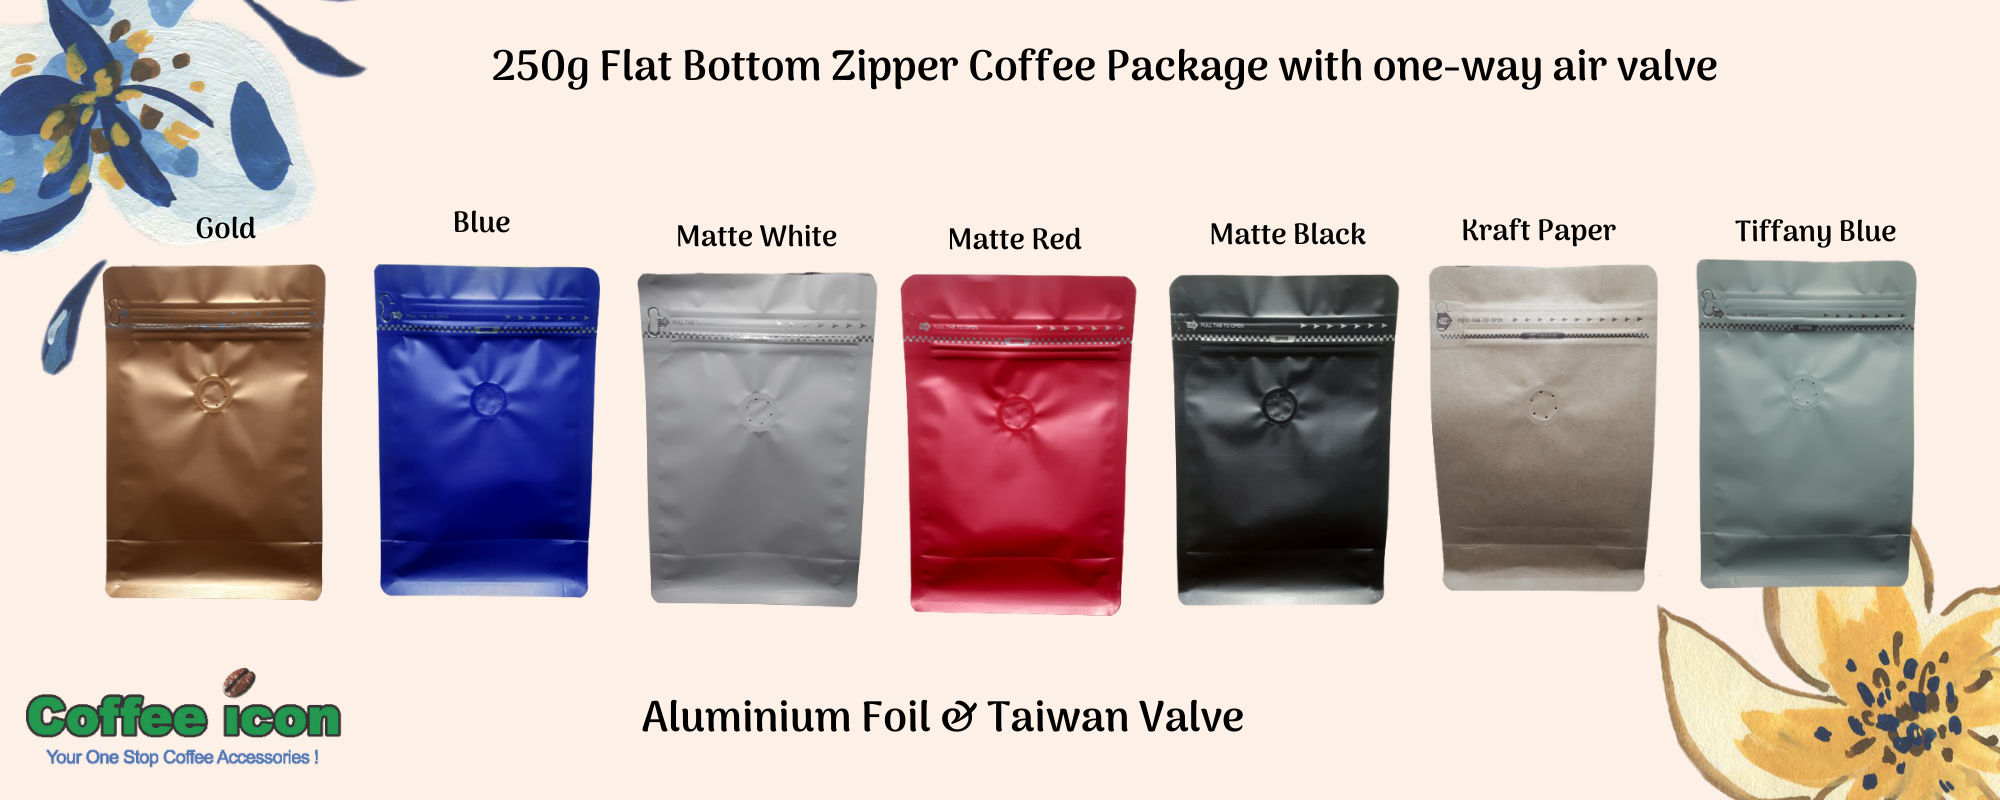 250g Flat Bottom Zipper Coffee Package with one-way air valve.png